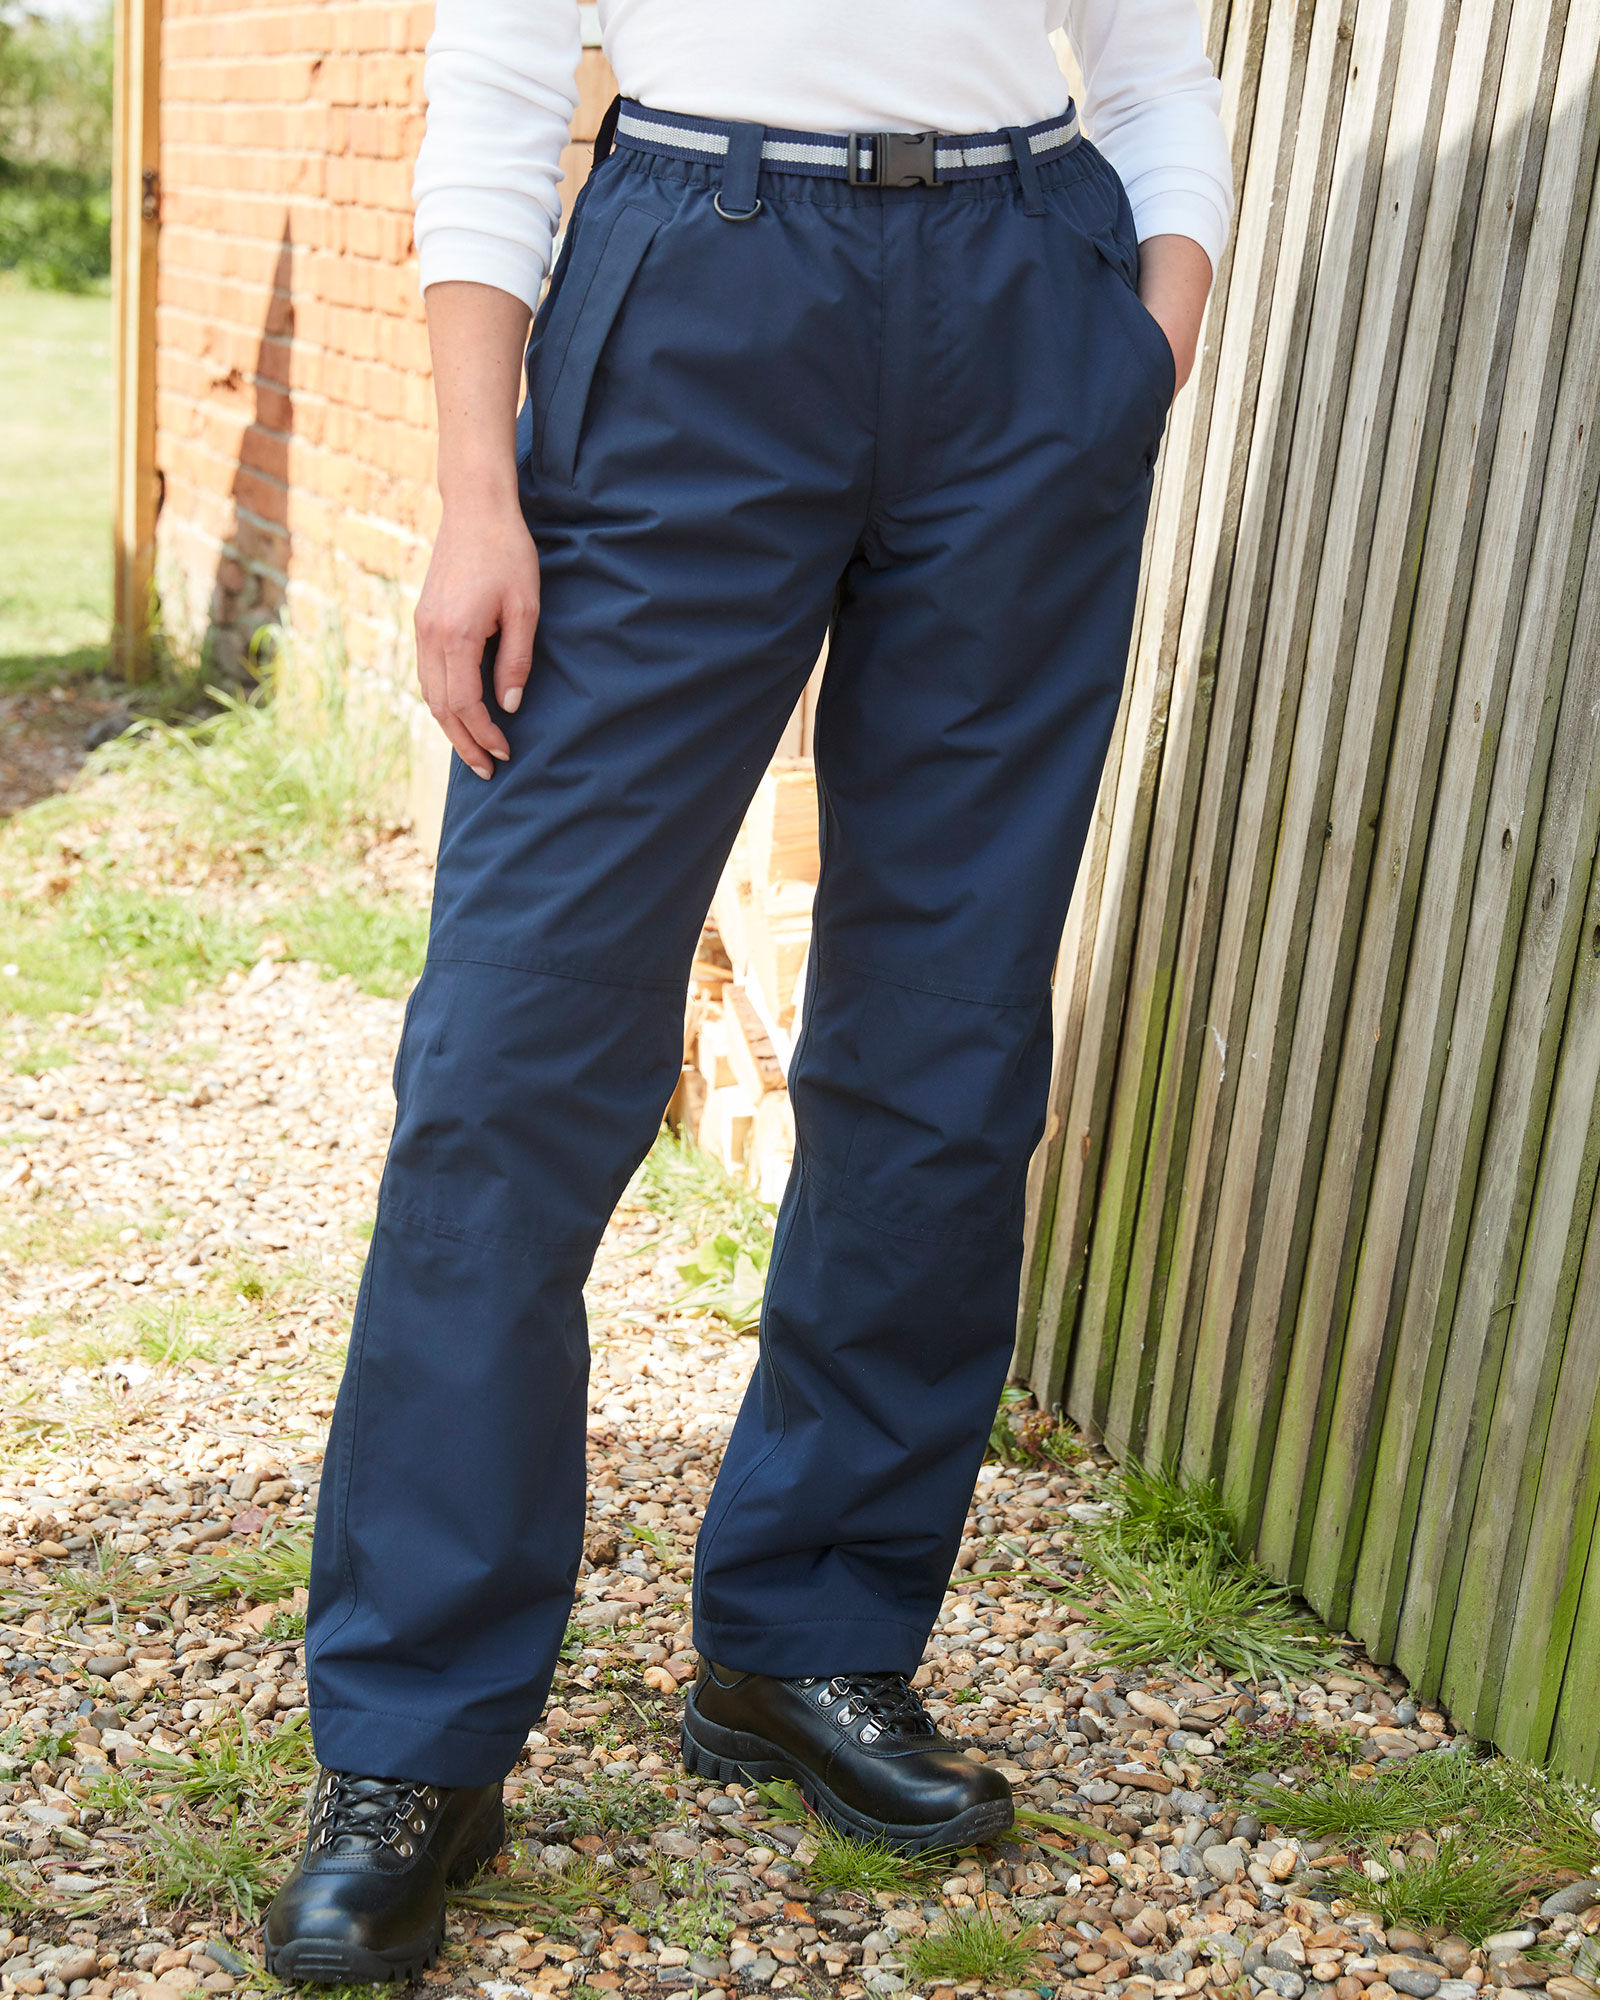 Fladen Thermal Lined Bib  Brace Trousers  Glasgow Angling Centre